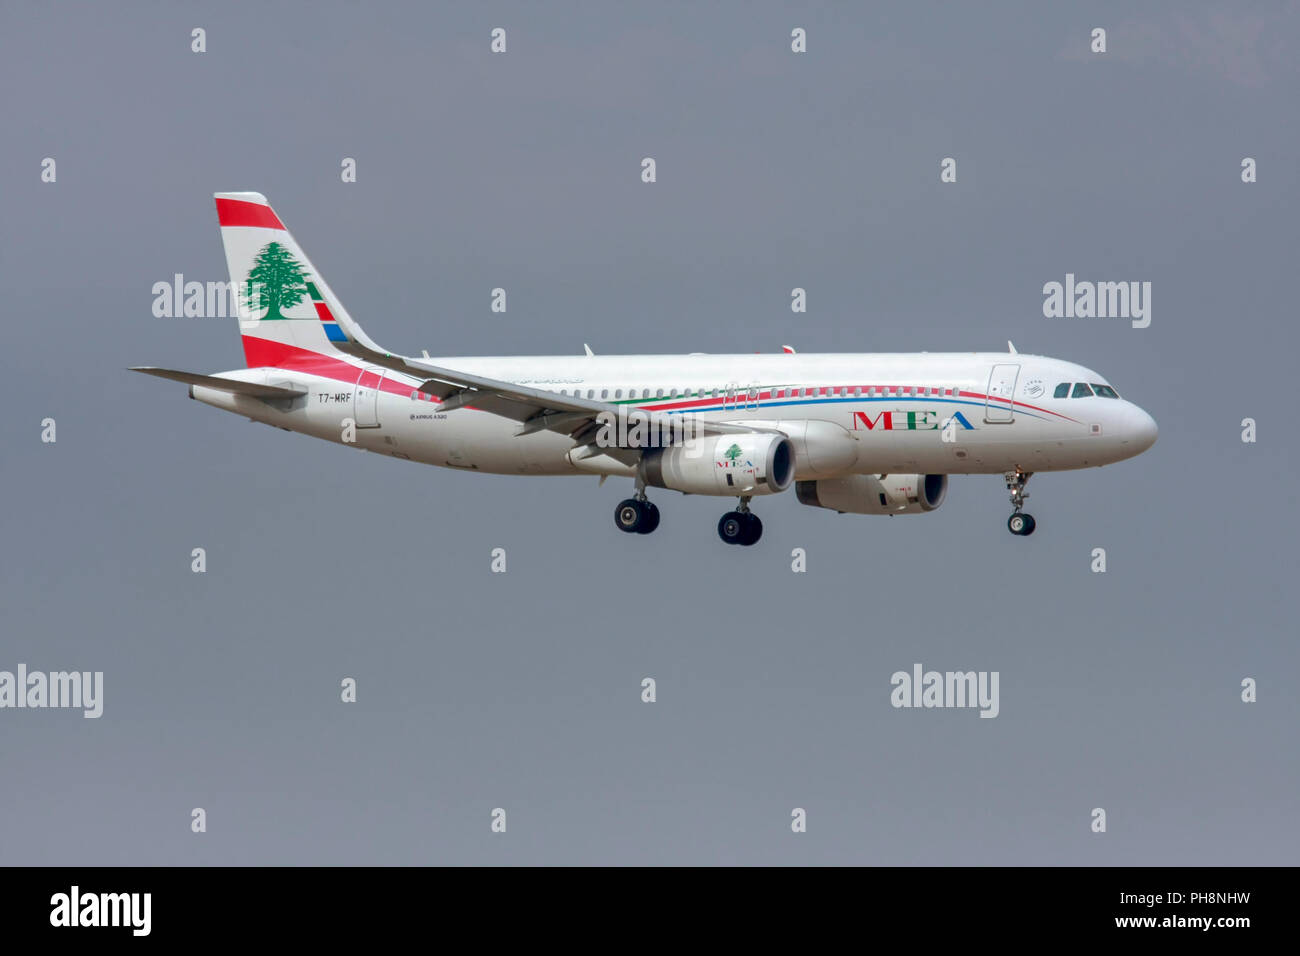 T7-MRF MEA - Middle East Airlines Airbus A320-200 at Malpensa (MXP / LIMC), Milan, Italy Stock Photo